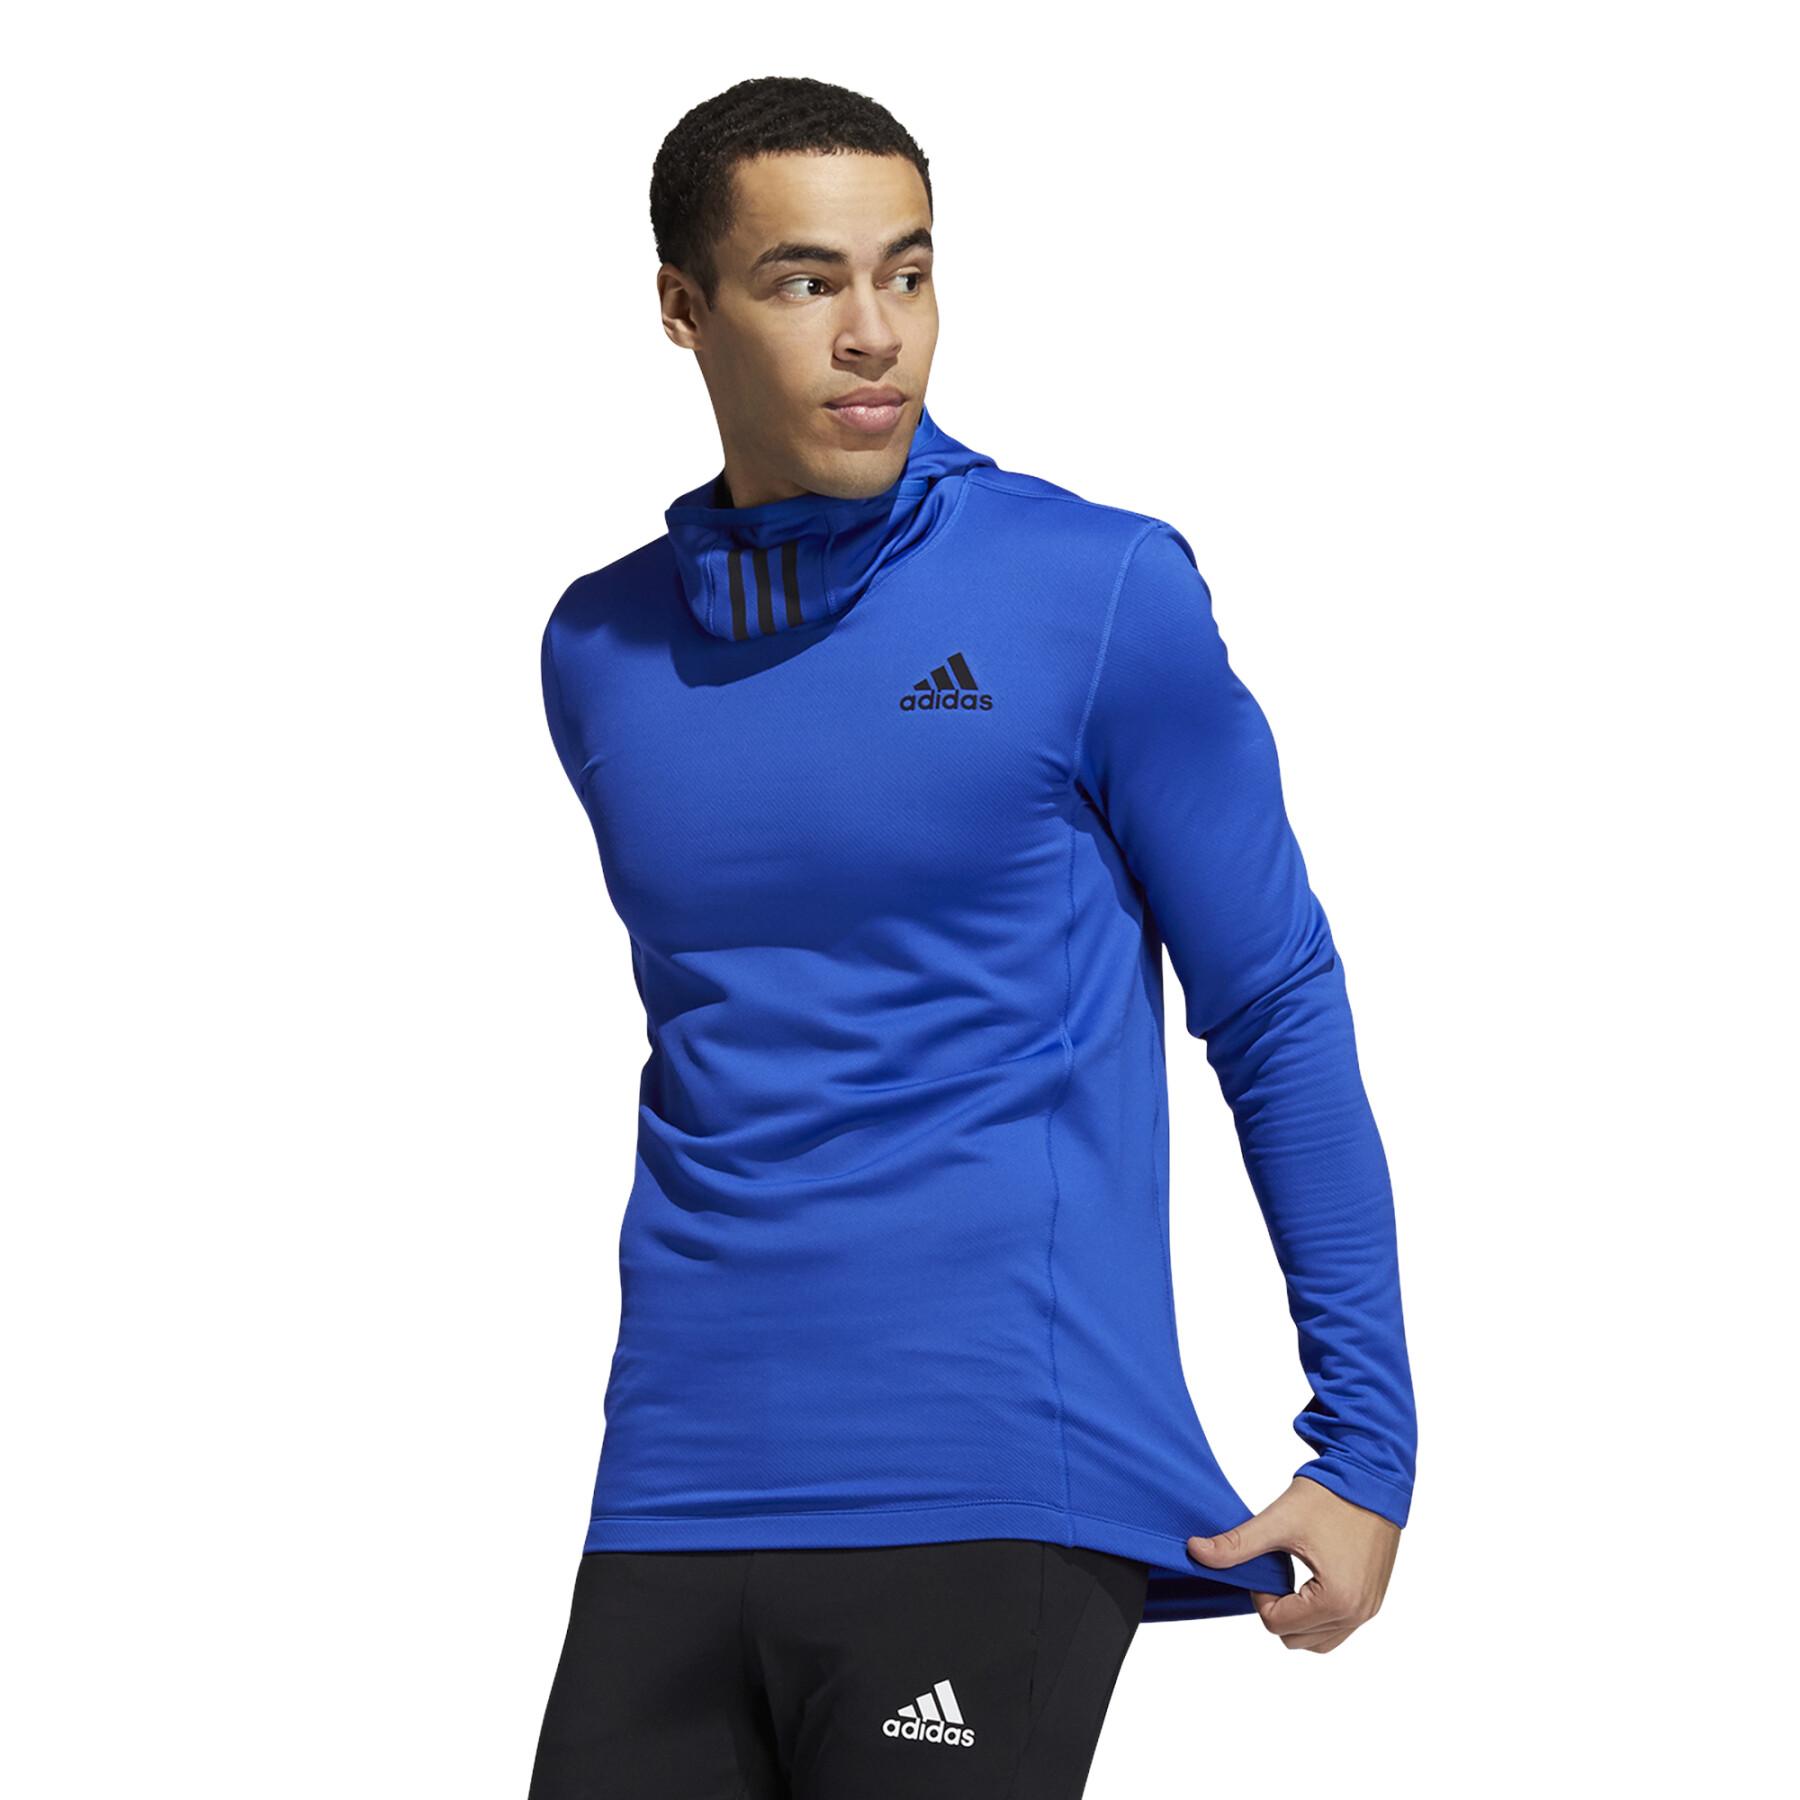 Camisola com capuz adidas COLD.RDY Techfit Fitted